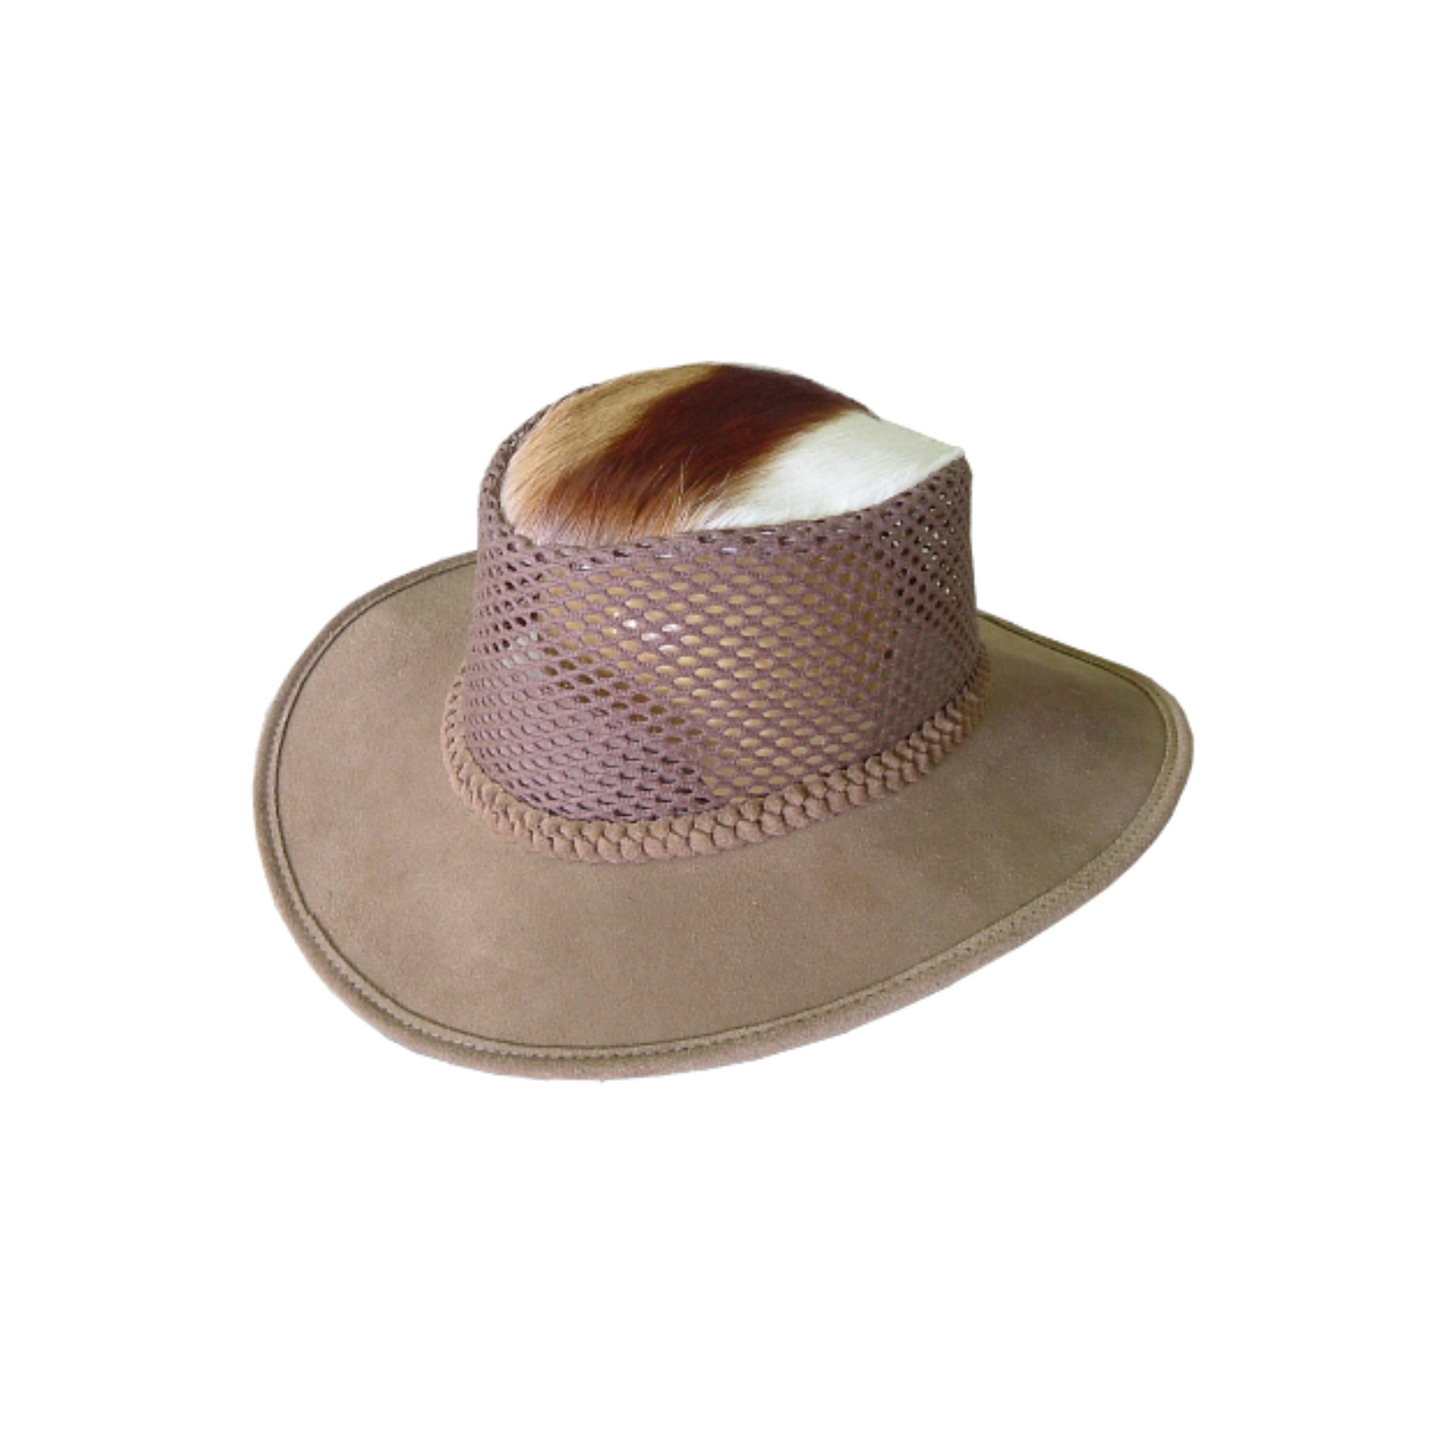 Suede Leather Broad Brim Hats w/Mesh Insert